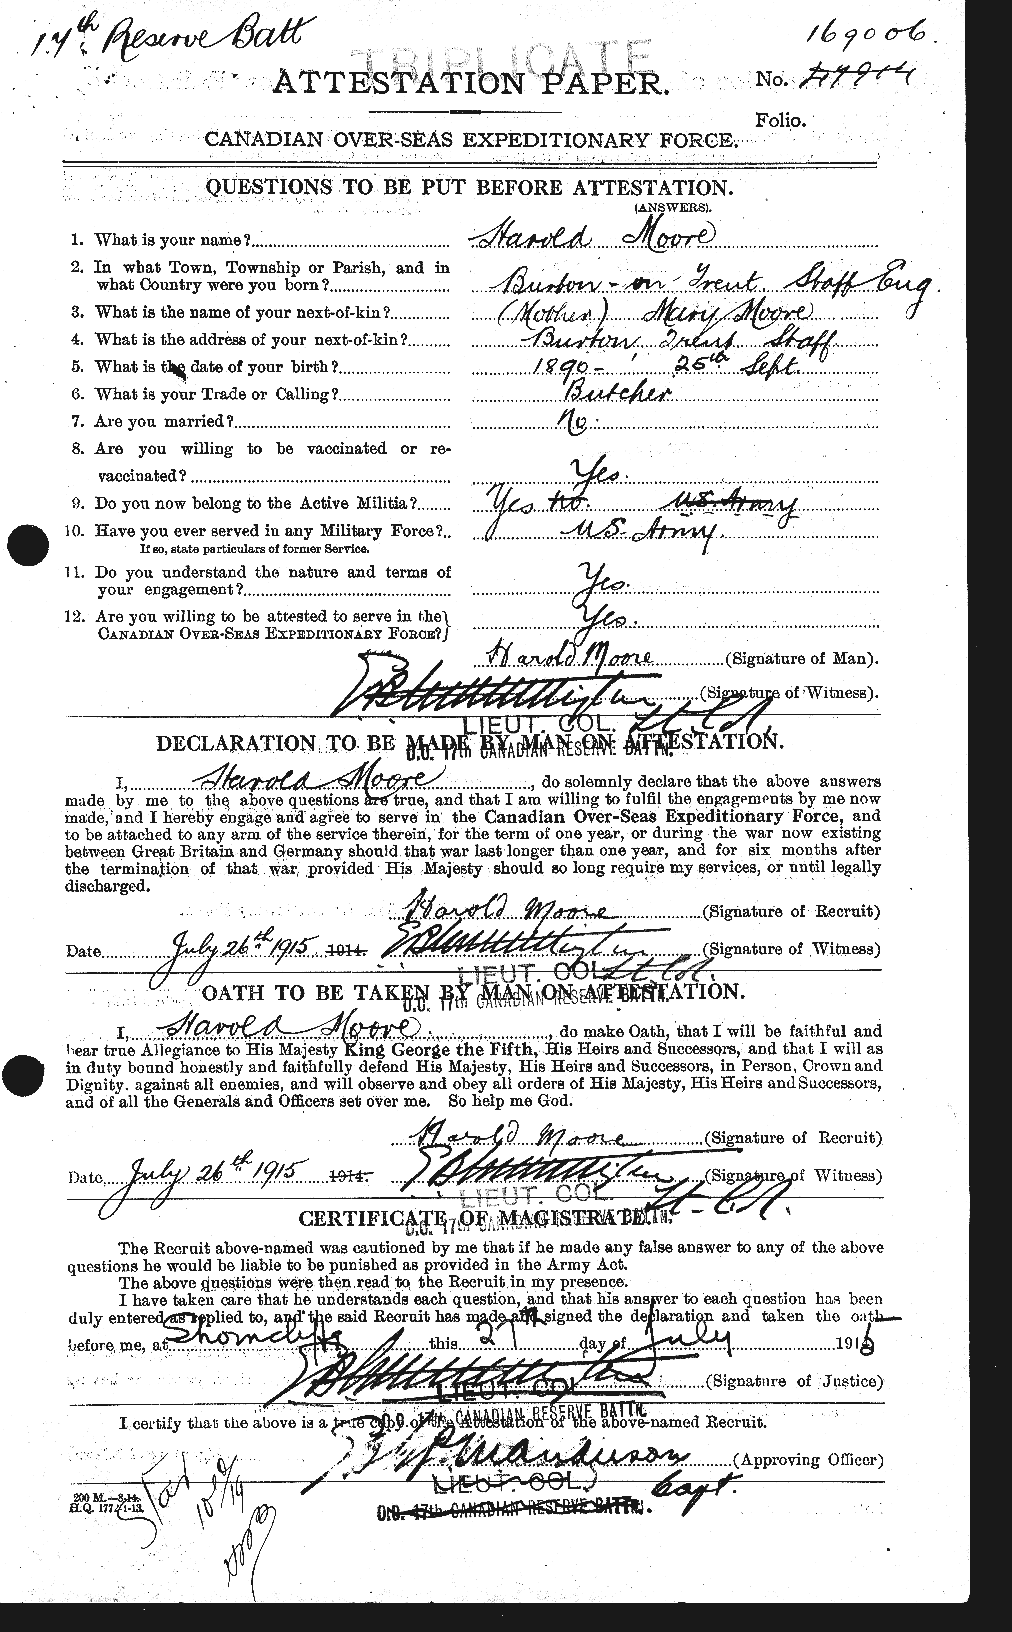 Personnel Records of the First World War - CEF 502056a